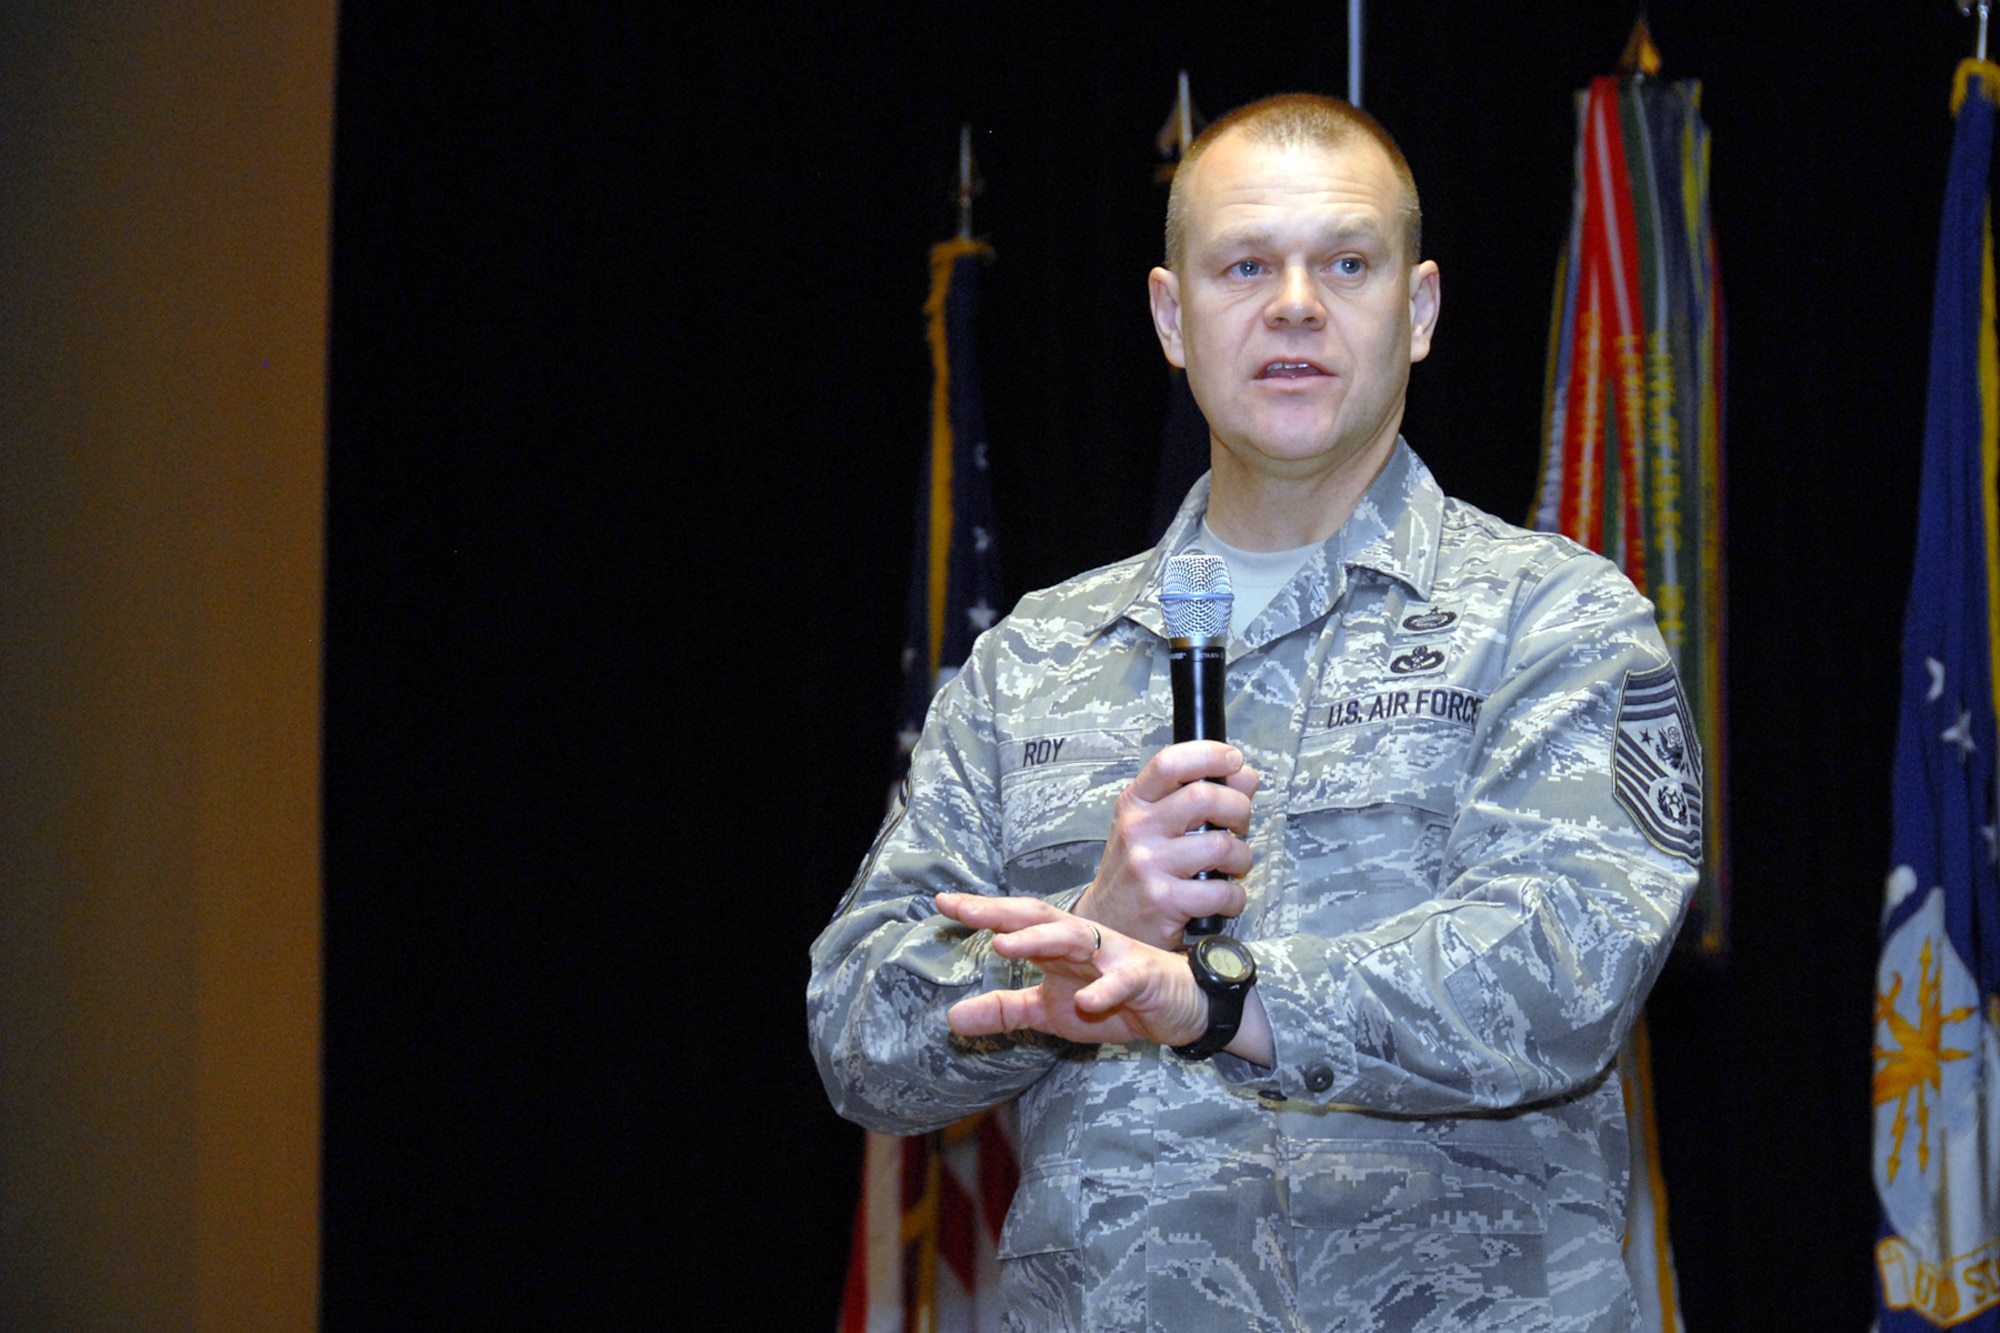 Chief Master Sgt. of the Air Force James A. Roy addresses about 360 attendees at the third joint Michigan National Guard Senior Noncommissioned Officer Conference Feb. 6, 2010, in Grand Rapids, Mich. Chief Roy is a native of Monroe, Mich. (U.S. Air Force photo/Master Sgt. Clancey Pence)